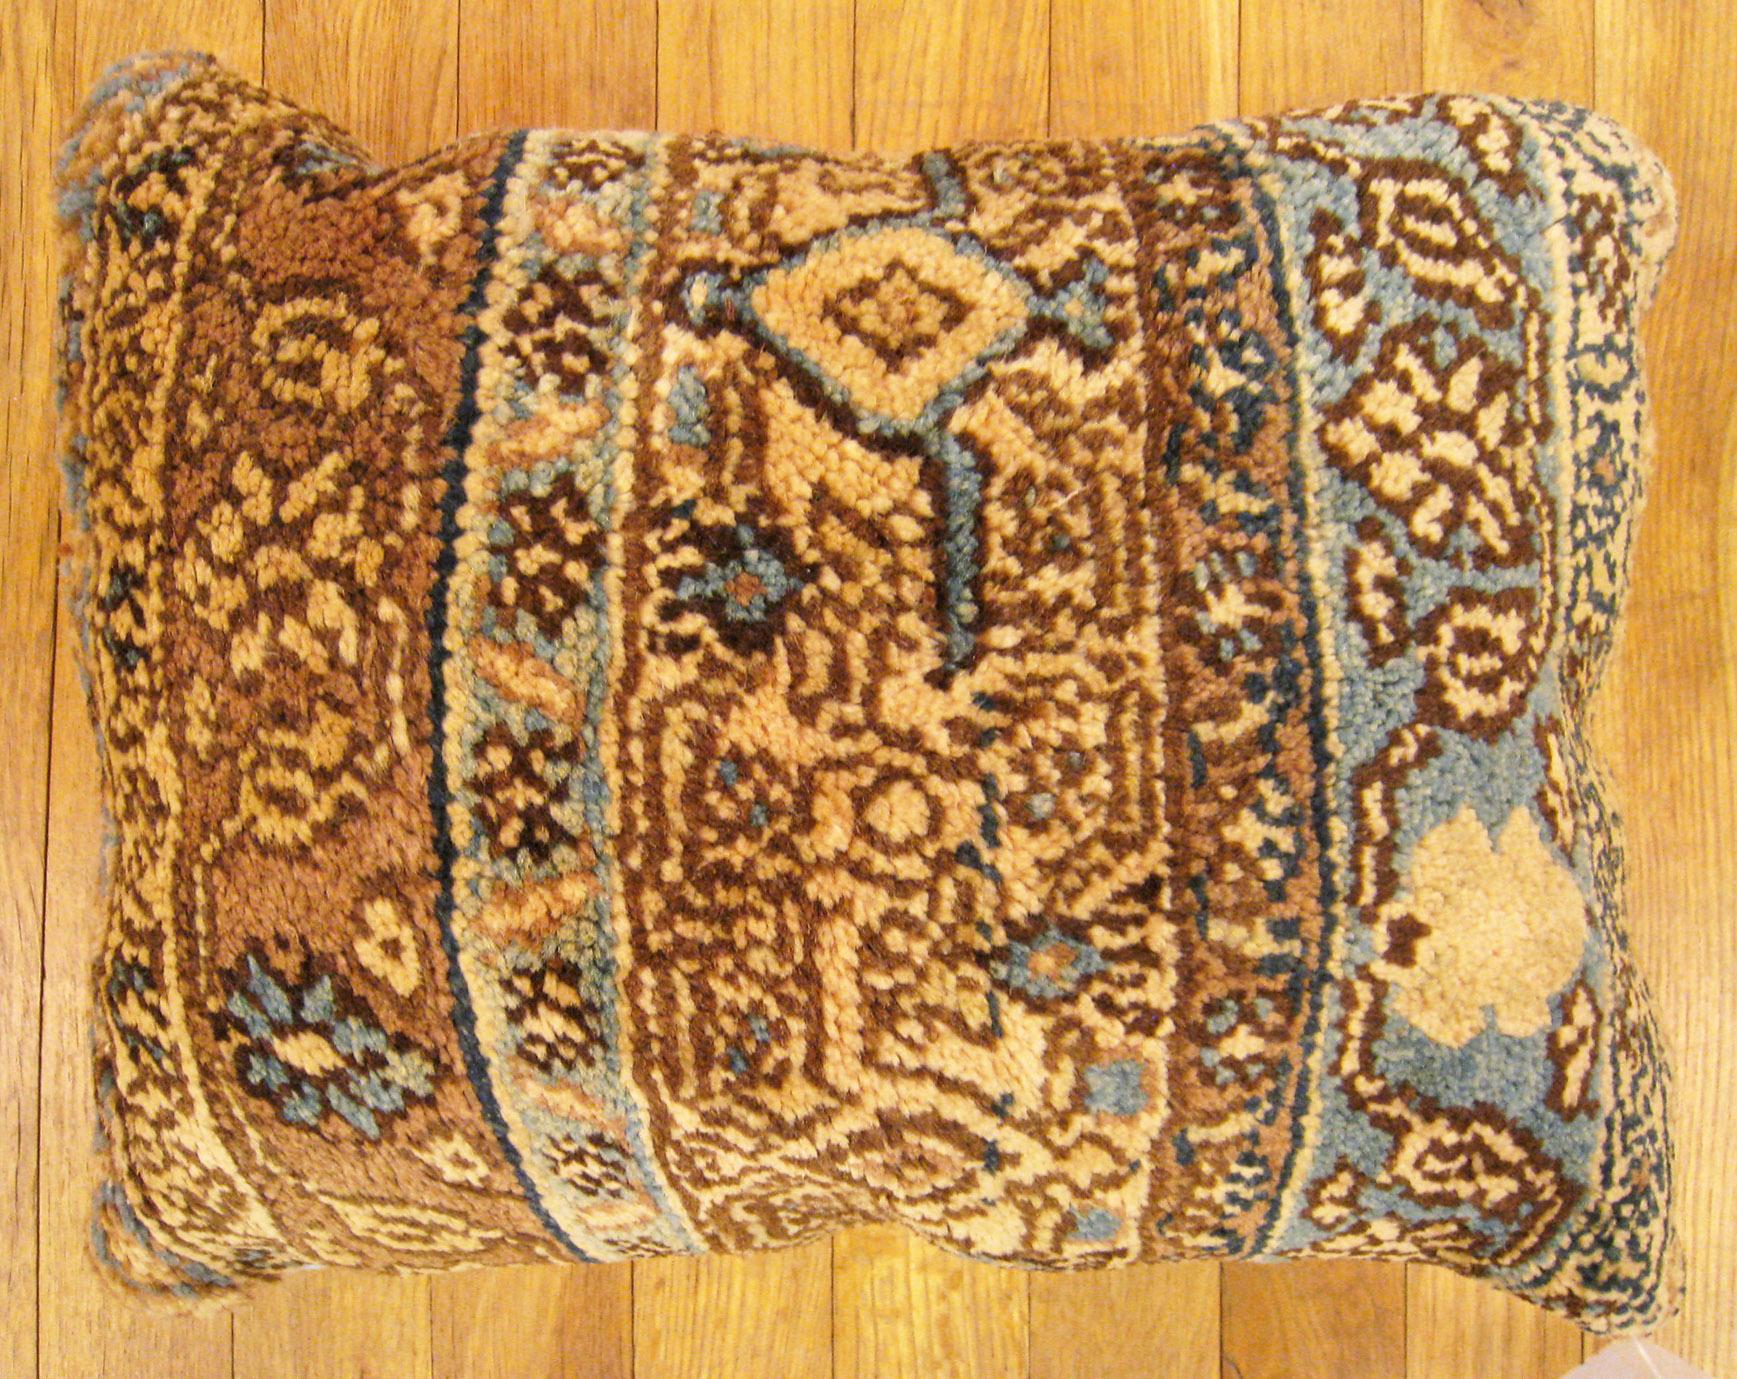 Vintage Persian Pillow; size 1'3” x 1'6”.

A vintage decorative pillow with geometric abstracts motif in a light brown central field, size 1'3” x 1'6”. This lovely decorative pillow features a vintage fabric of a Persian pillow on front and back